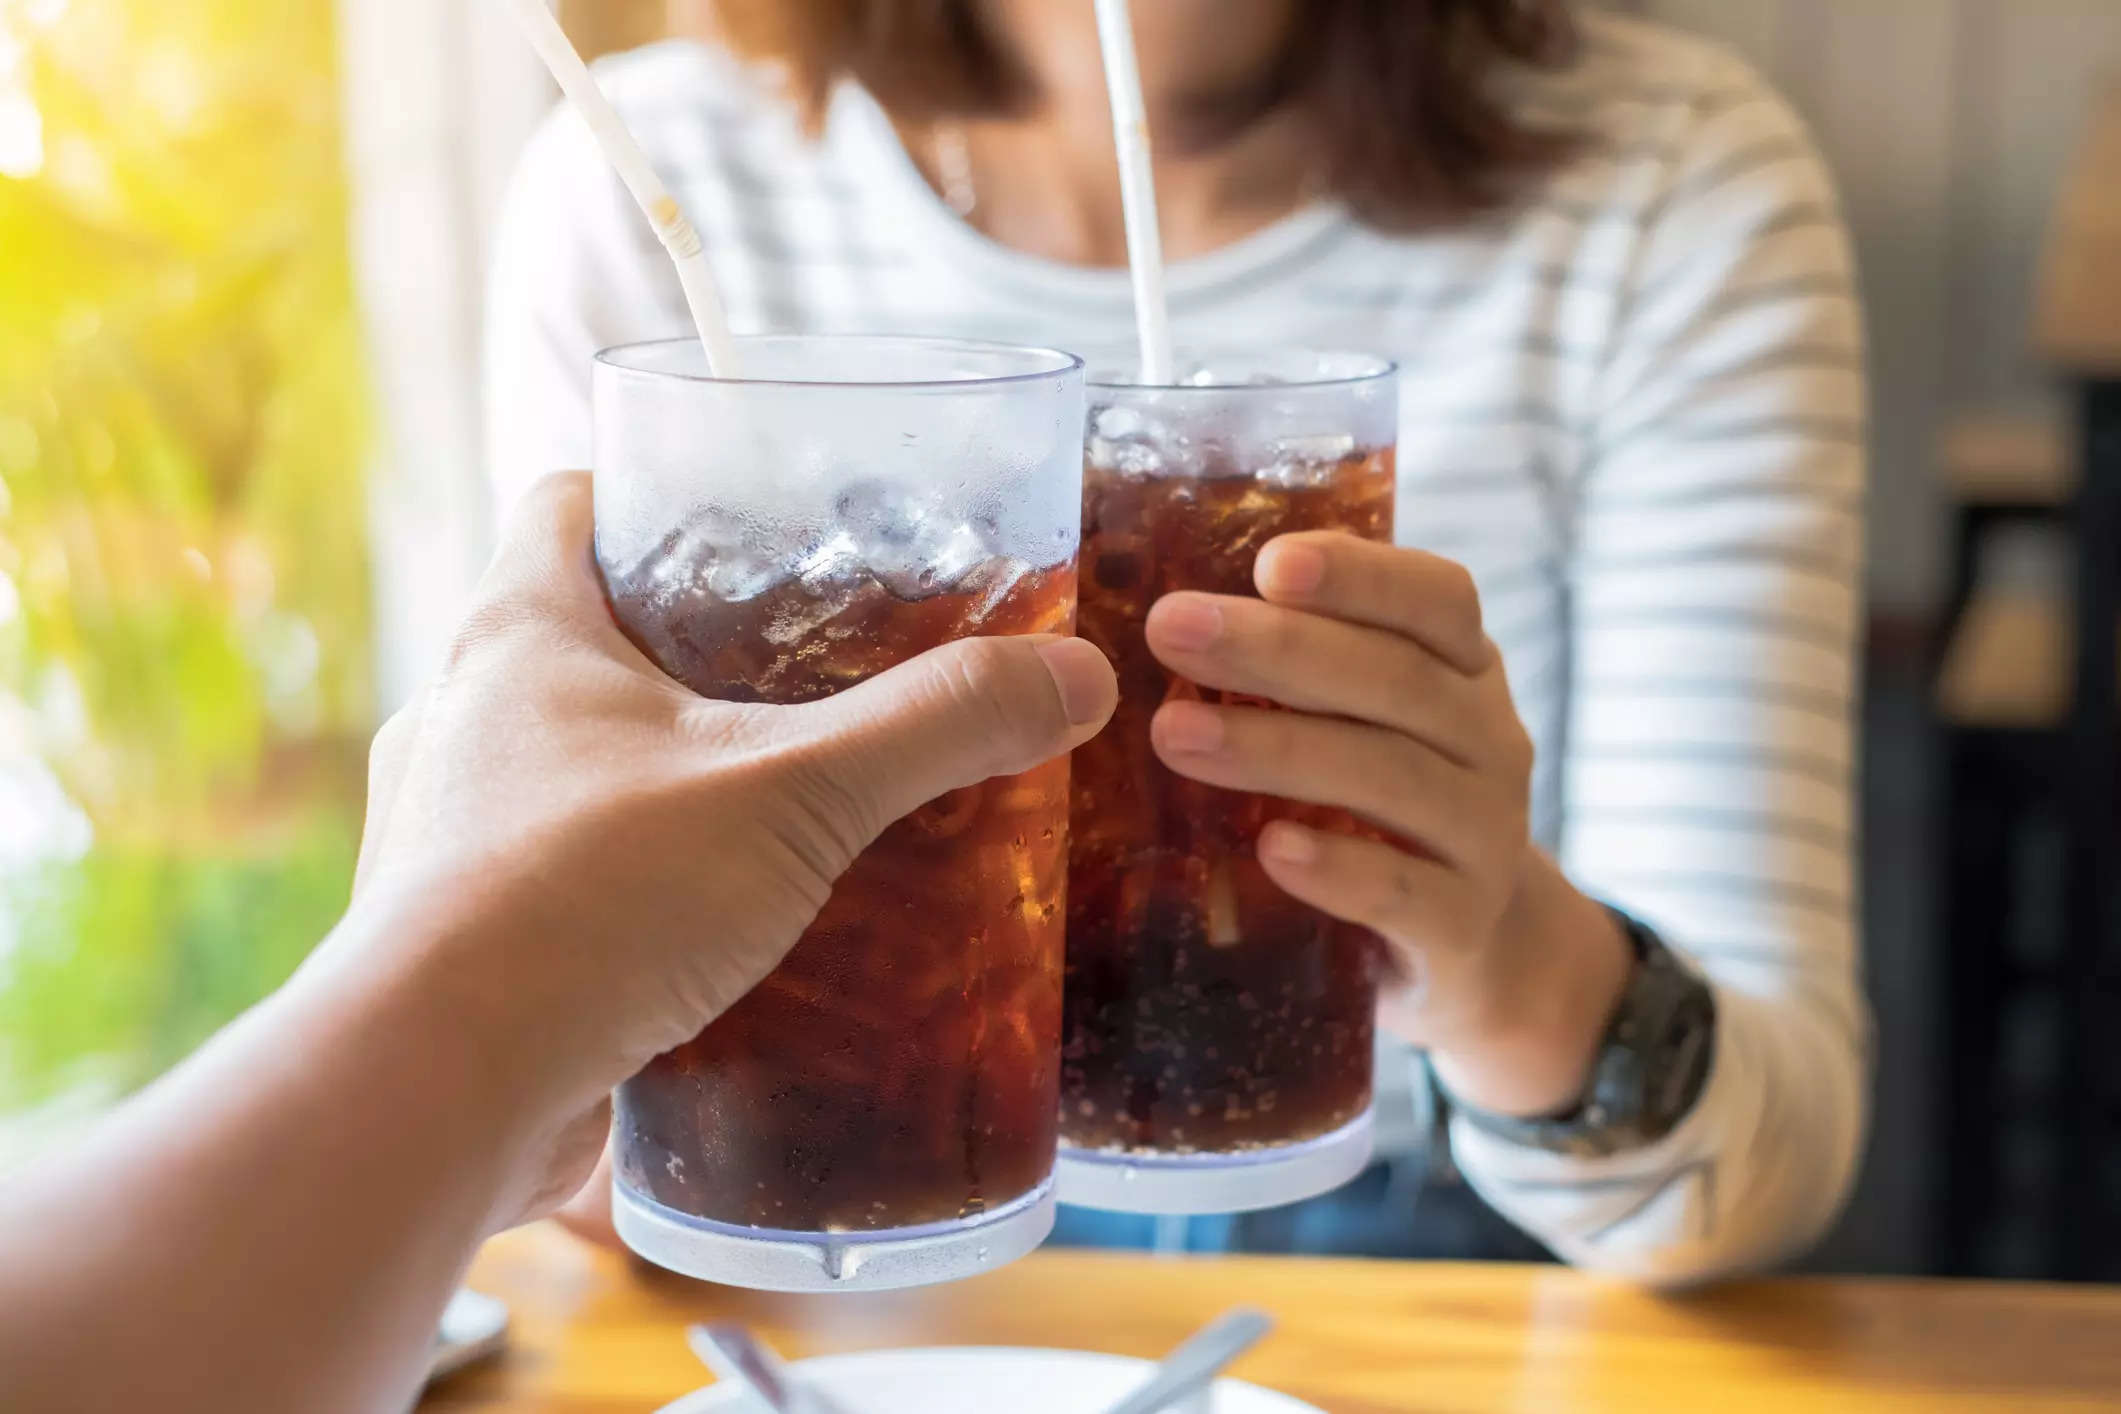 Phosphoric acid, predominantly found in soft drinks, along with caffeine can interfere with calcium absorption in the body thereby triggering and worsening bone loss.